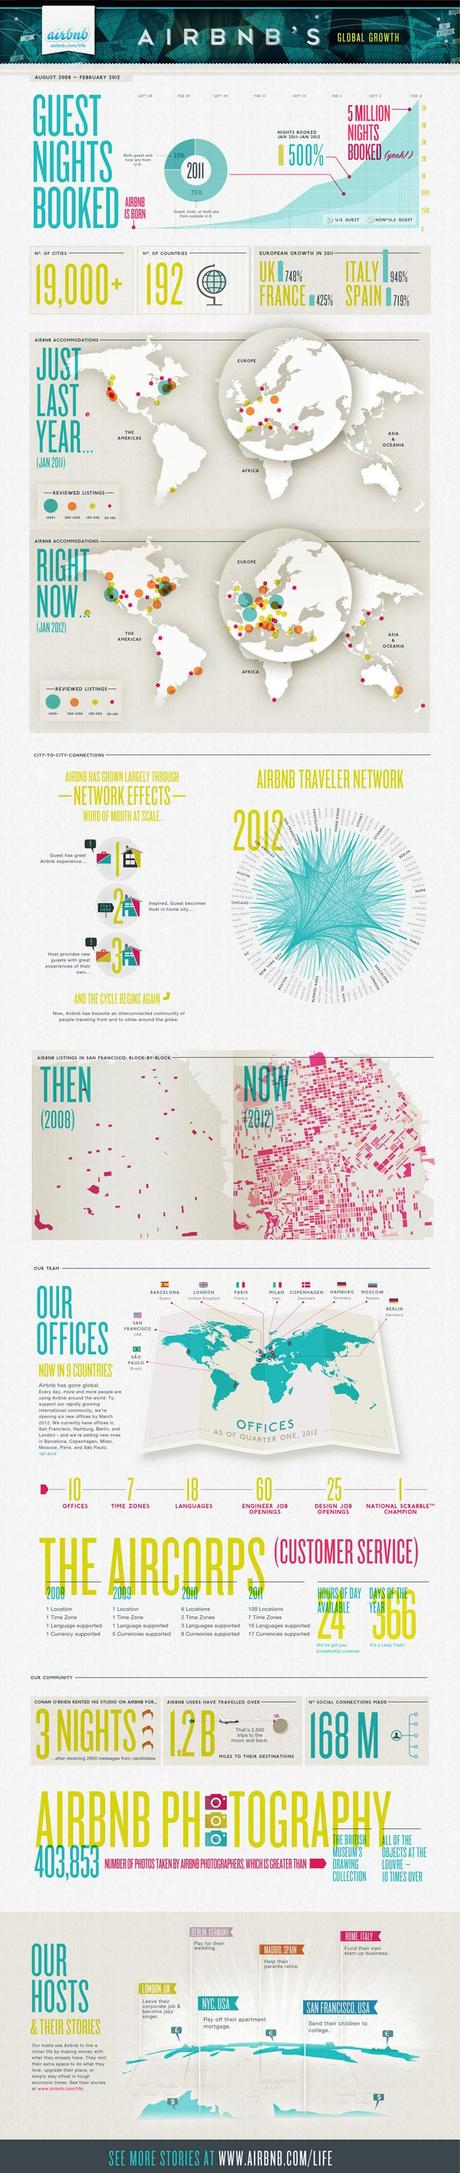 Infographic_Airbnb-Global-Growth